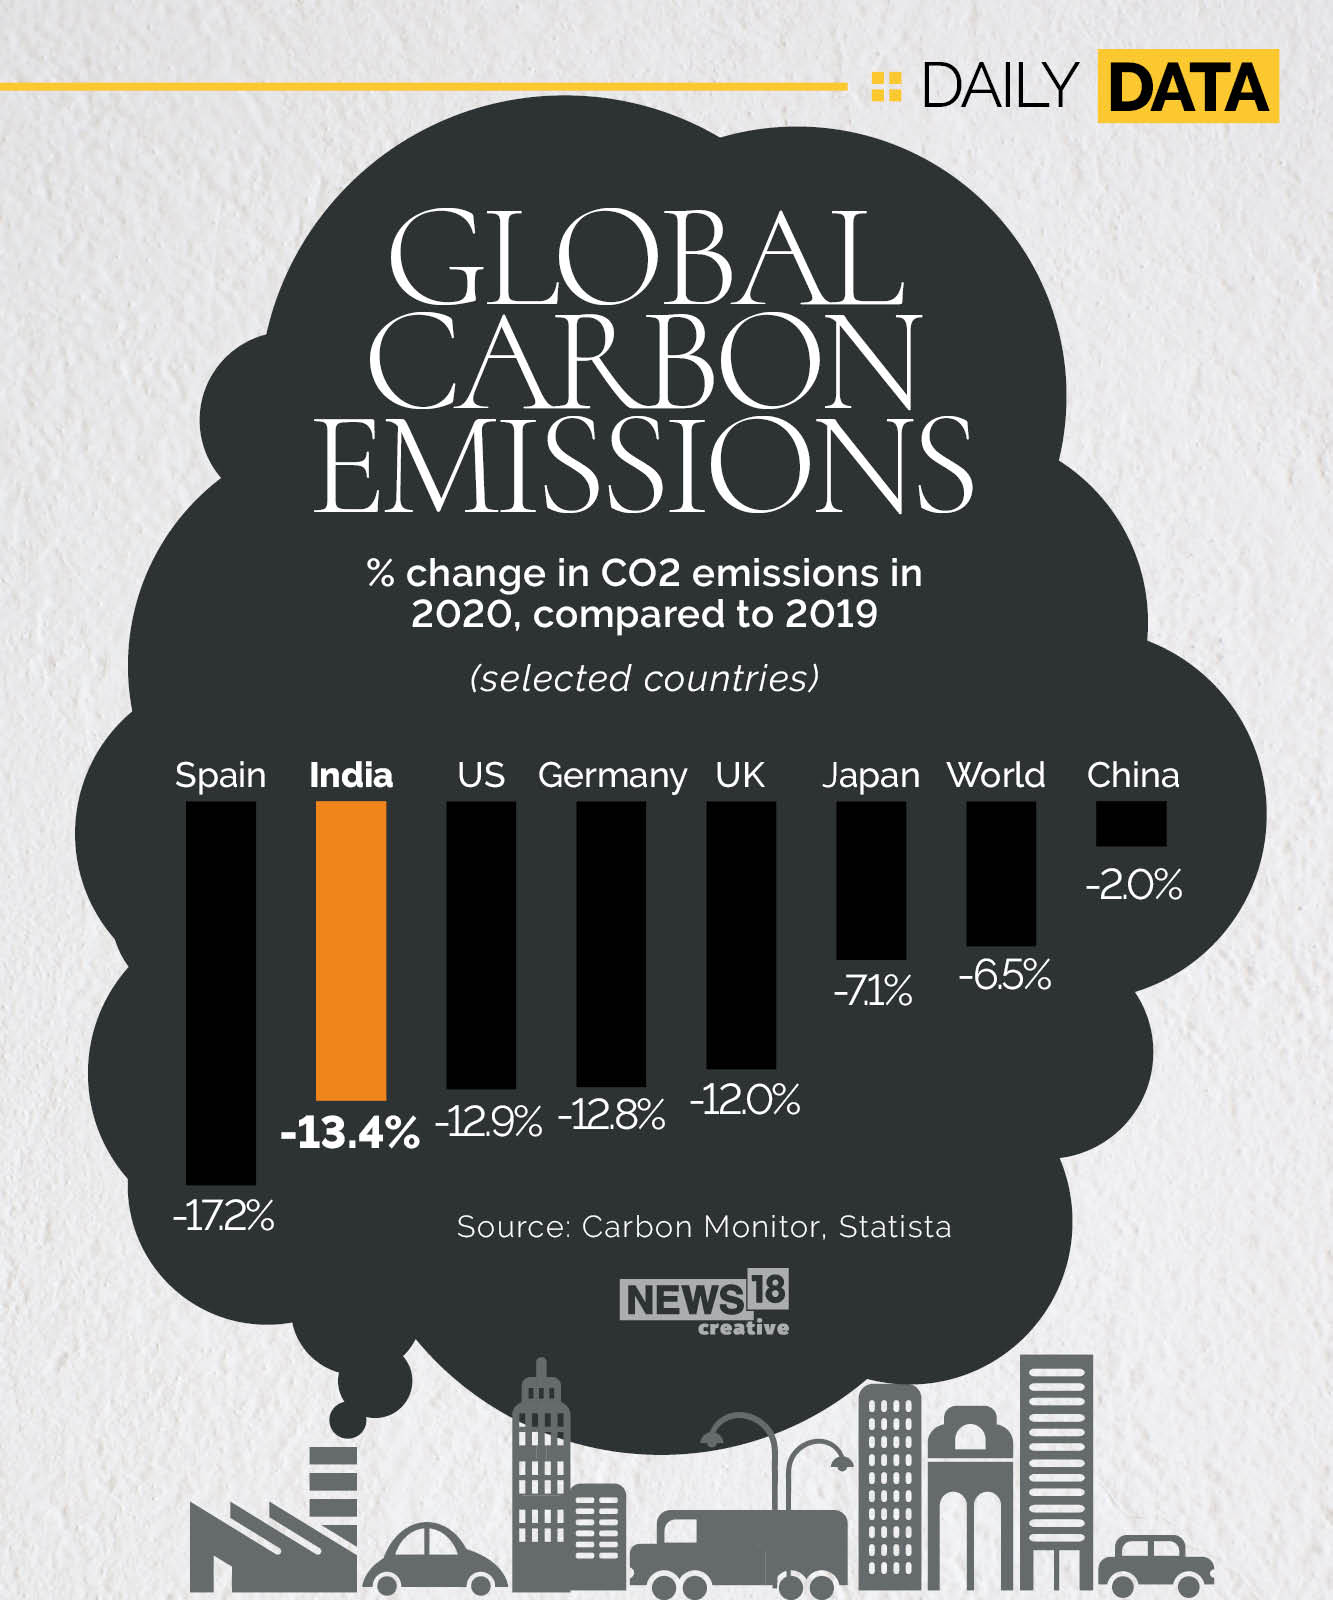 Lockdown effect: How global carbon emissions changed in 2020